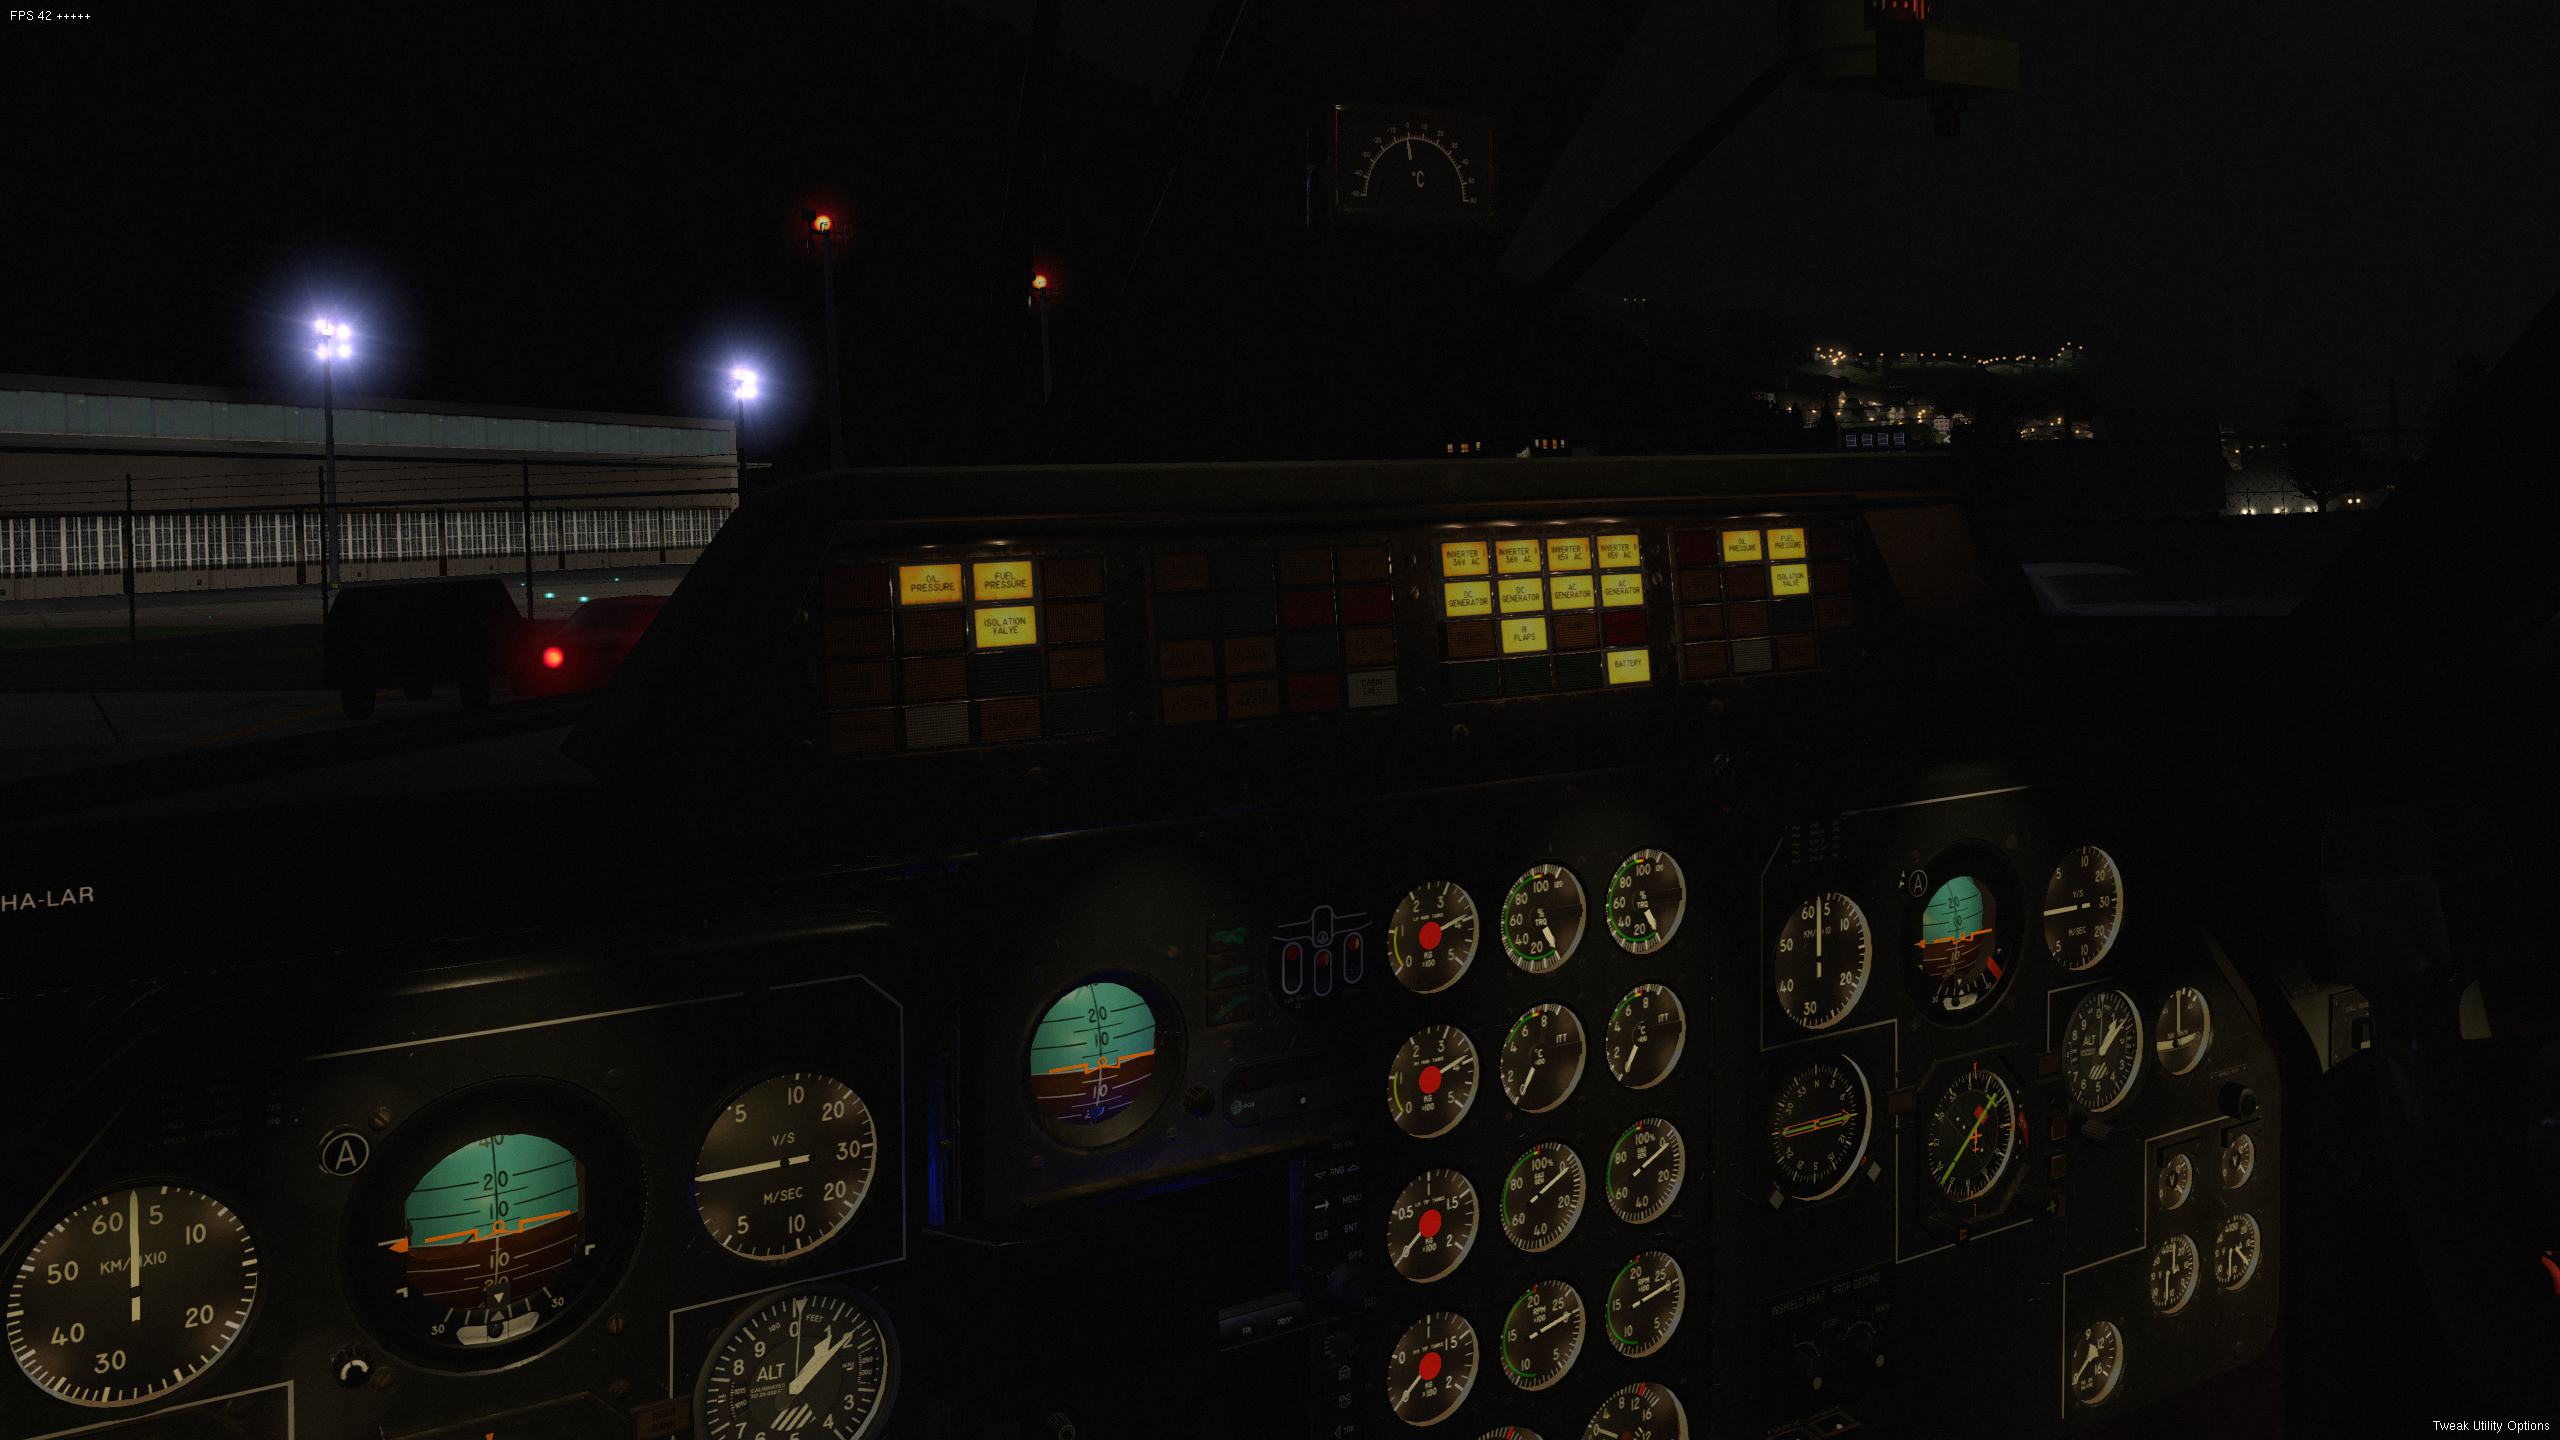 Let L-410 Turbolet - Cabin lights and lamps